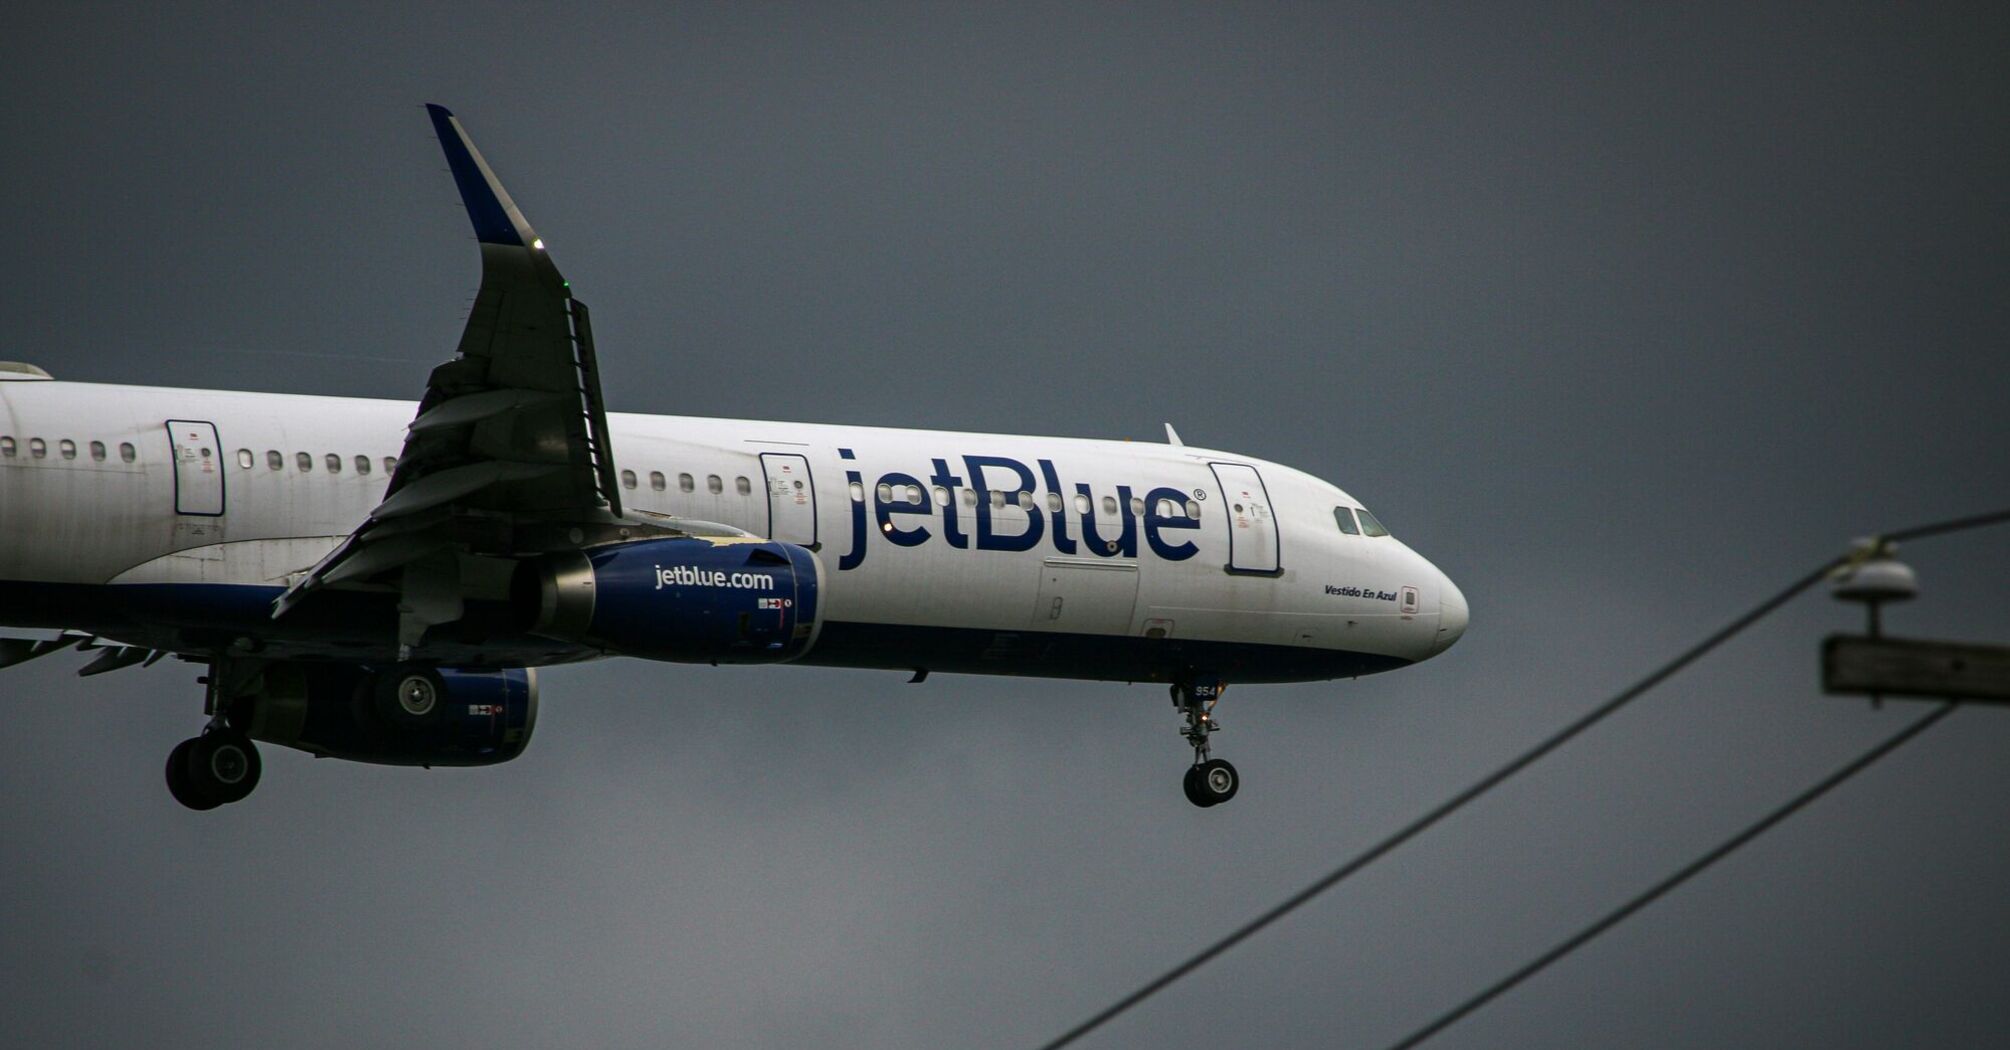 Jetblue A321 on final for runway